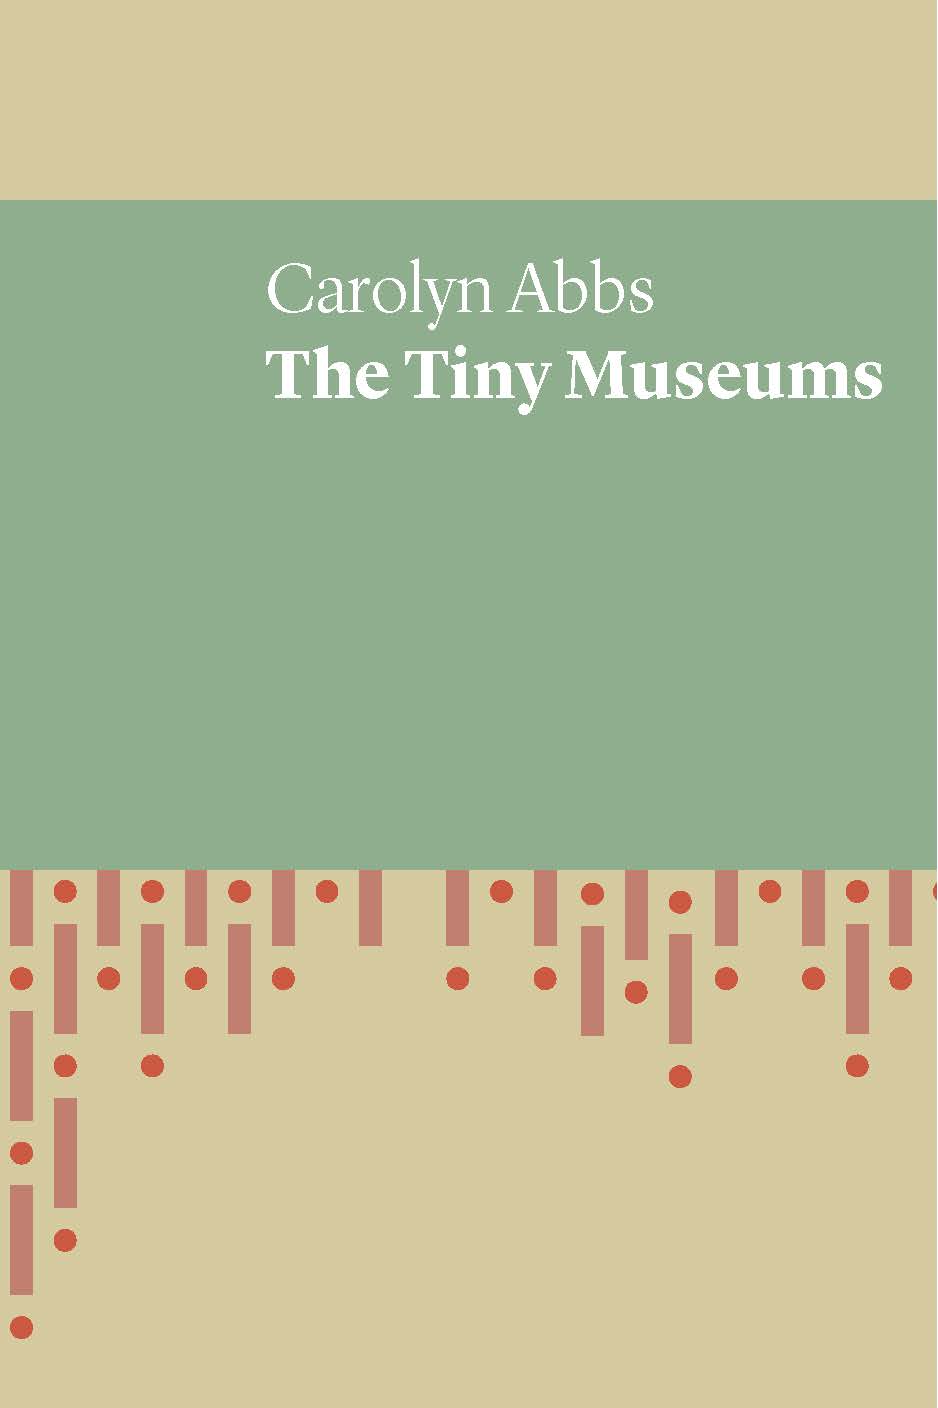 The Tiny Museums